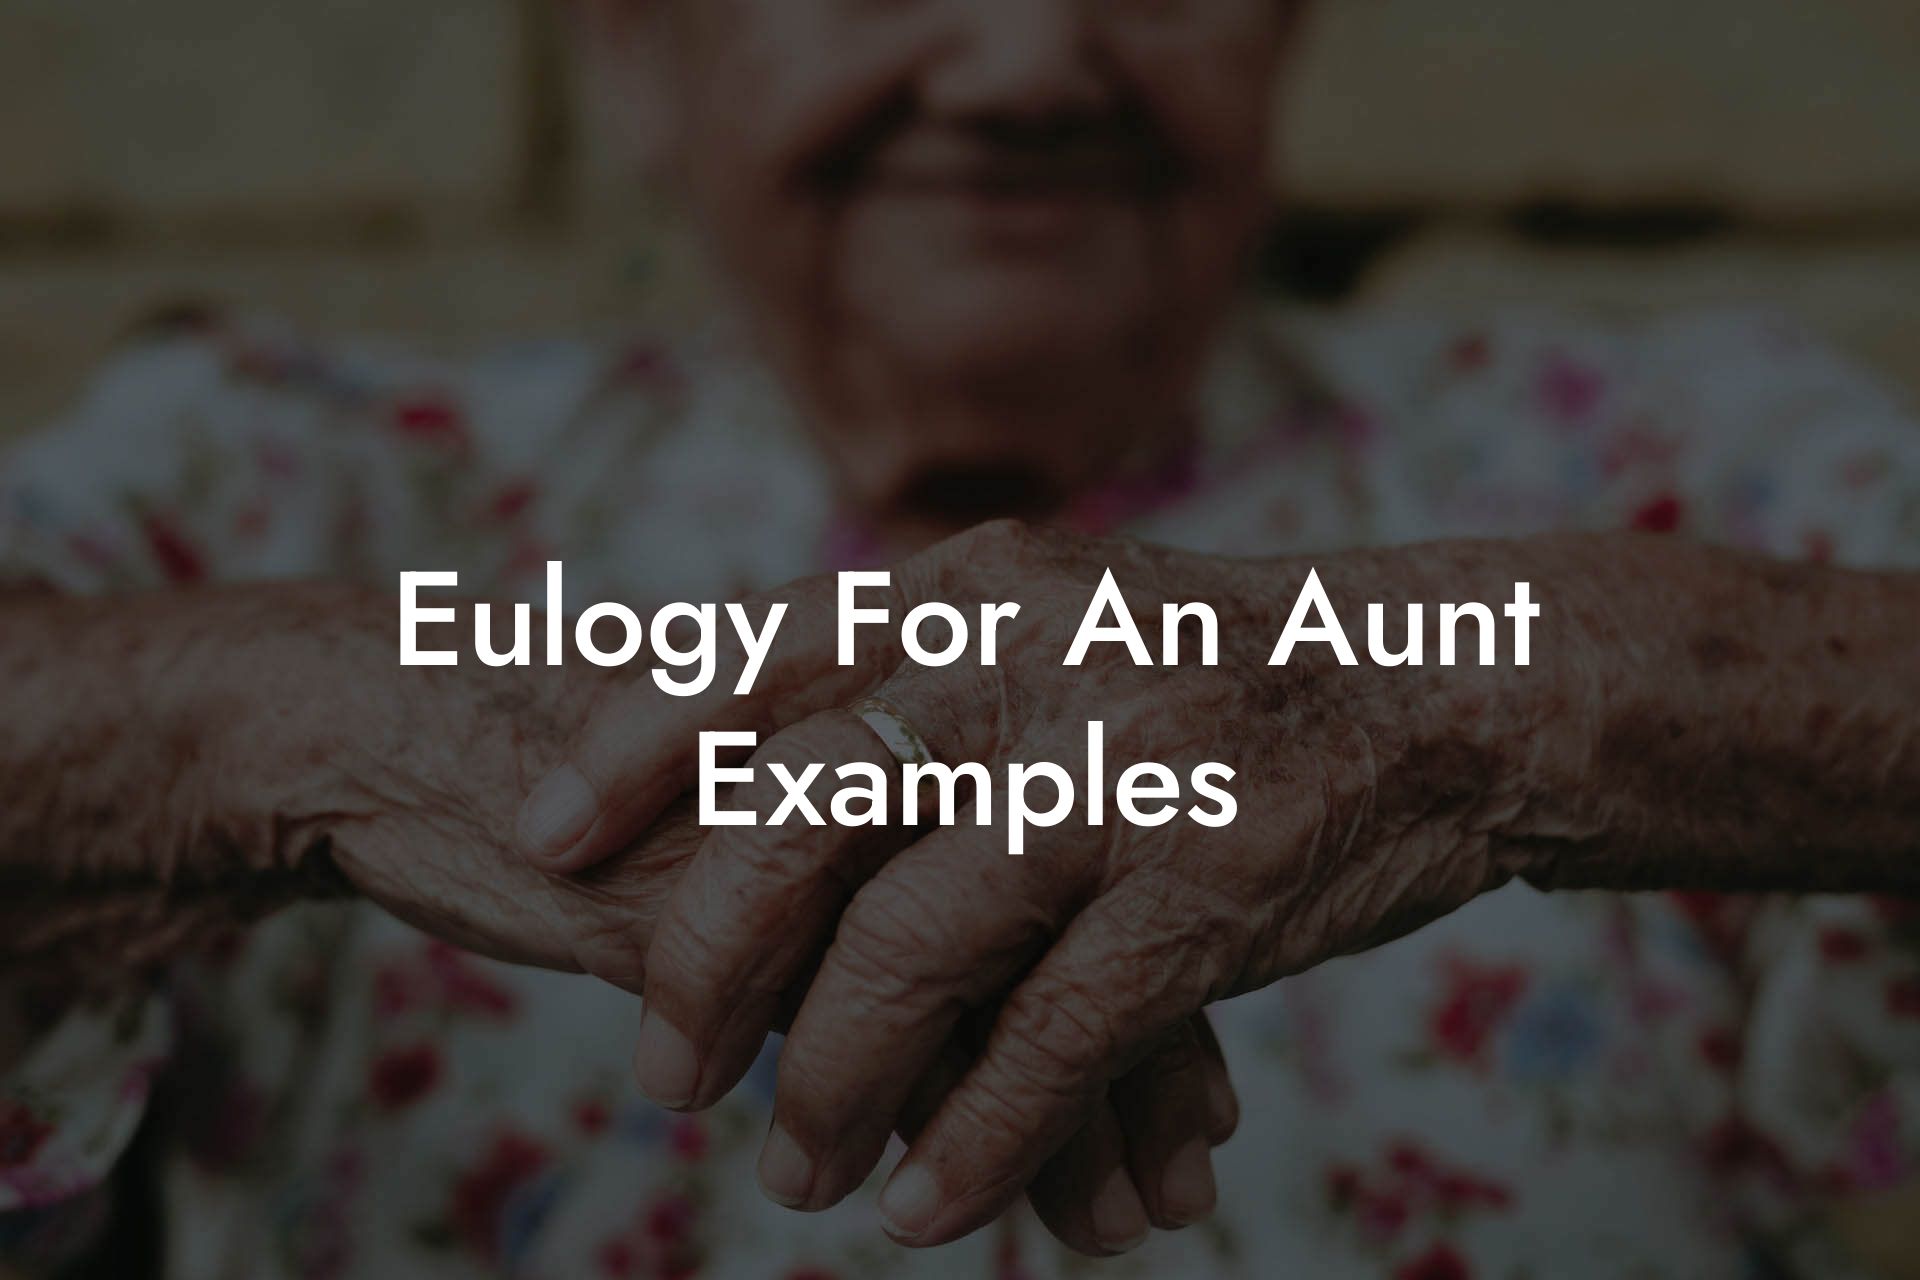 Eulogy For An Aunt Examples